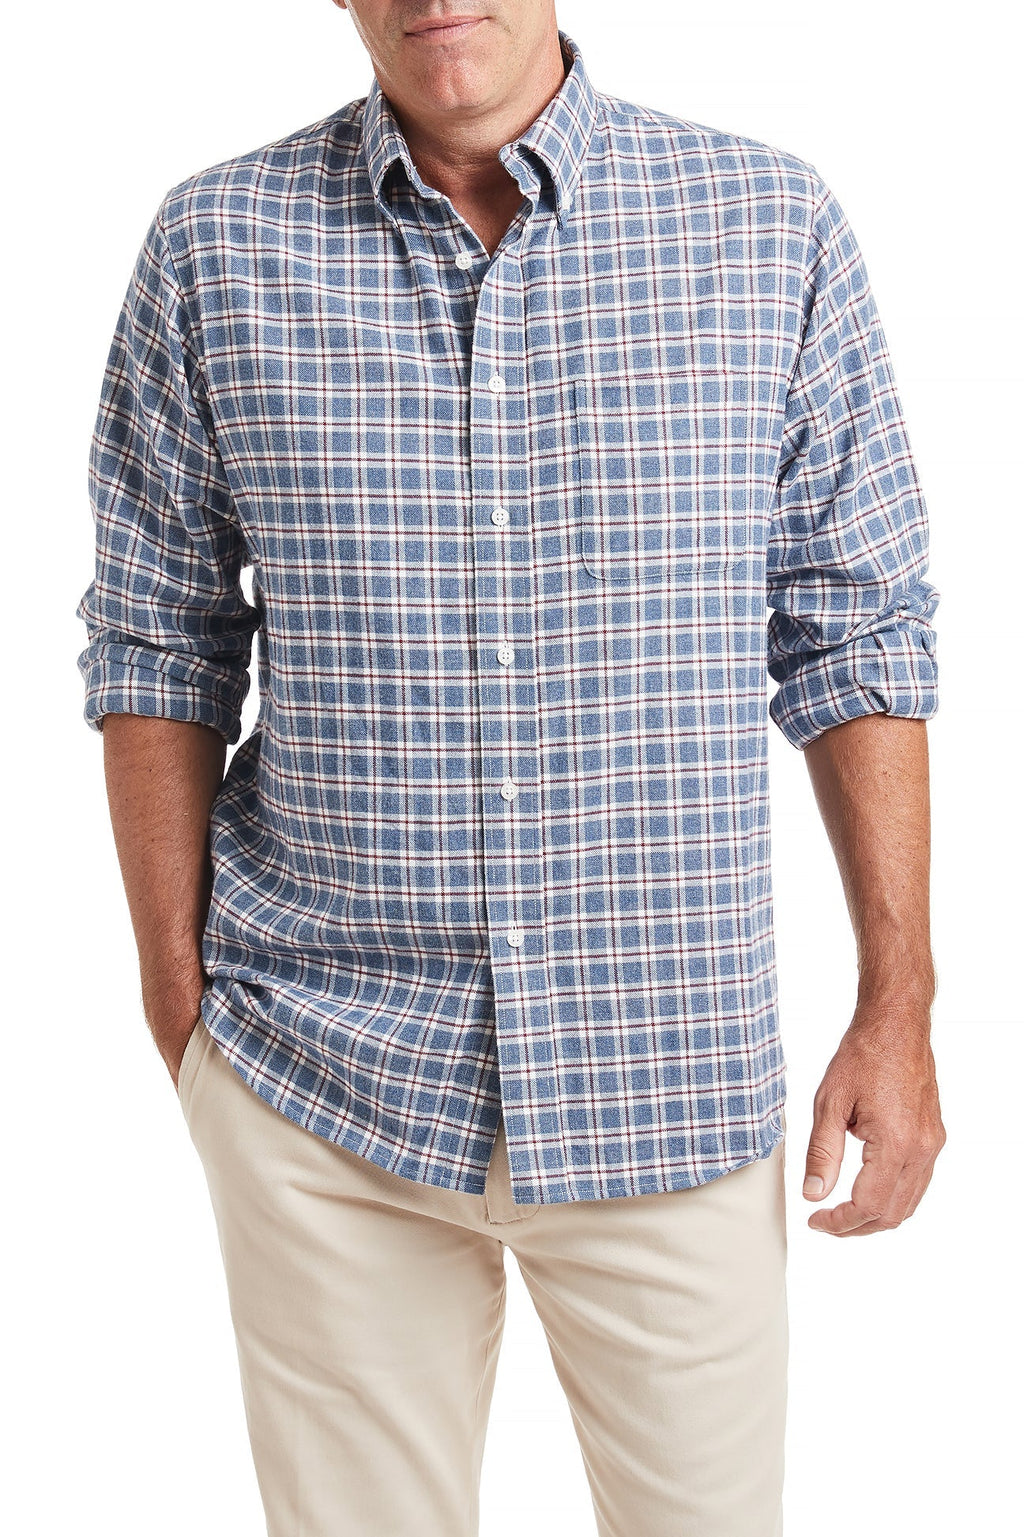 Chase Shirt Stable Tattersall Blue Flannel MENS SPORT SHIRTS Castaway ...